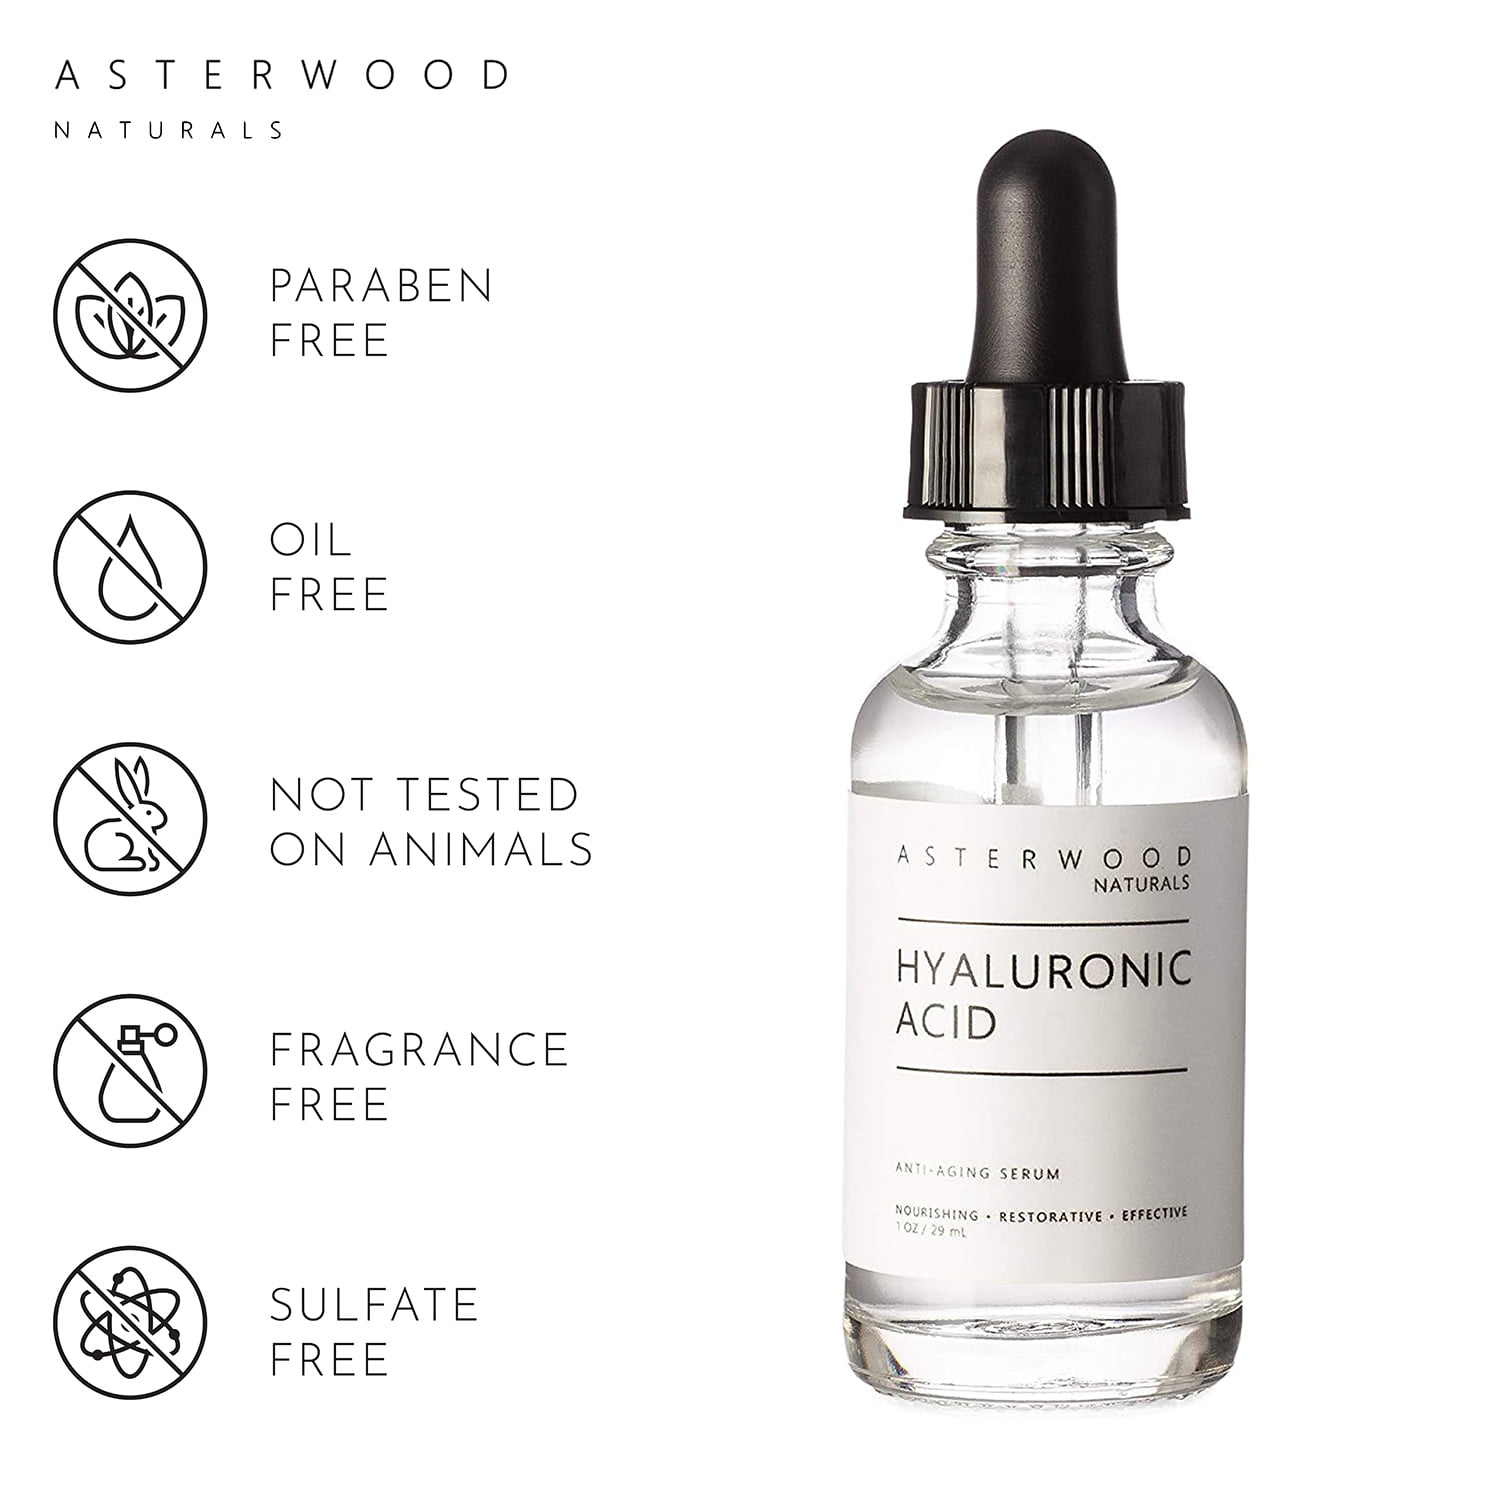 Asterwood Naturals Pure Hyaluronic Acid Serum for Face  Hydrating Plumping & Anti-Aging, 59ml/2 oz - image 2 of 4